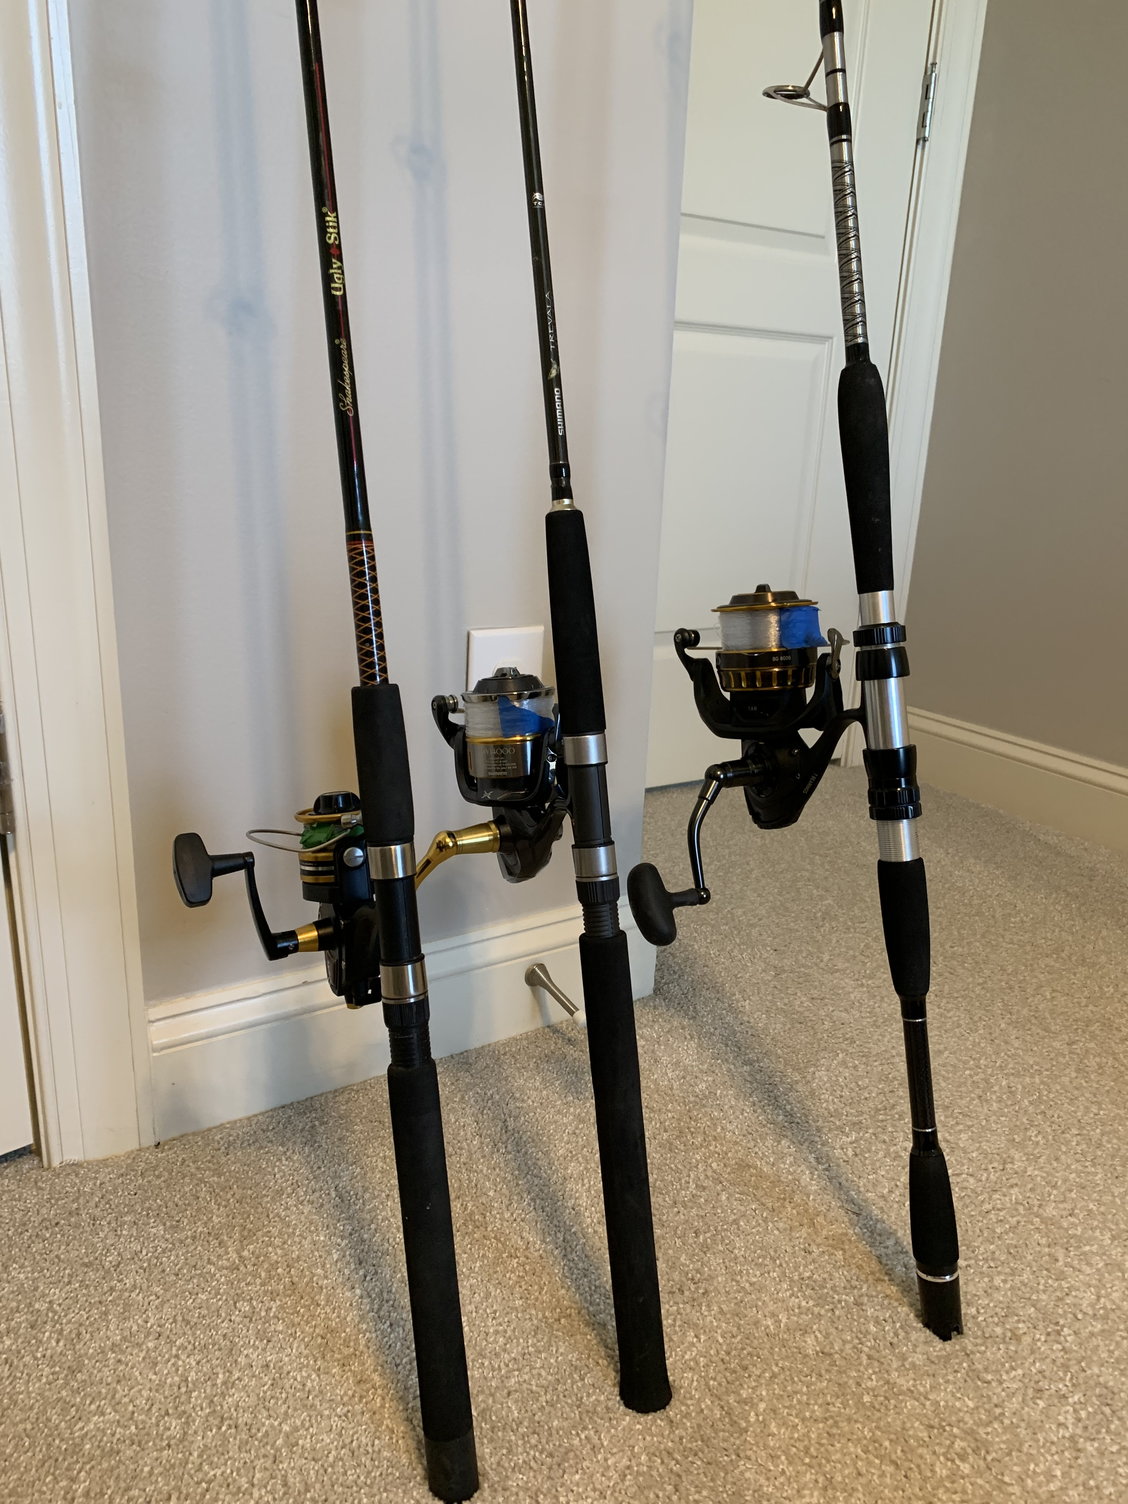 Lightweight Snapper/bottom fishing rod/reel - Page 3 - The Hull Truth -  Boating and Fishing Forum